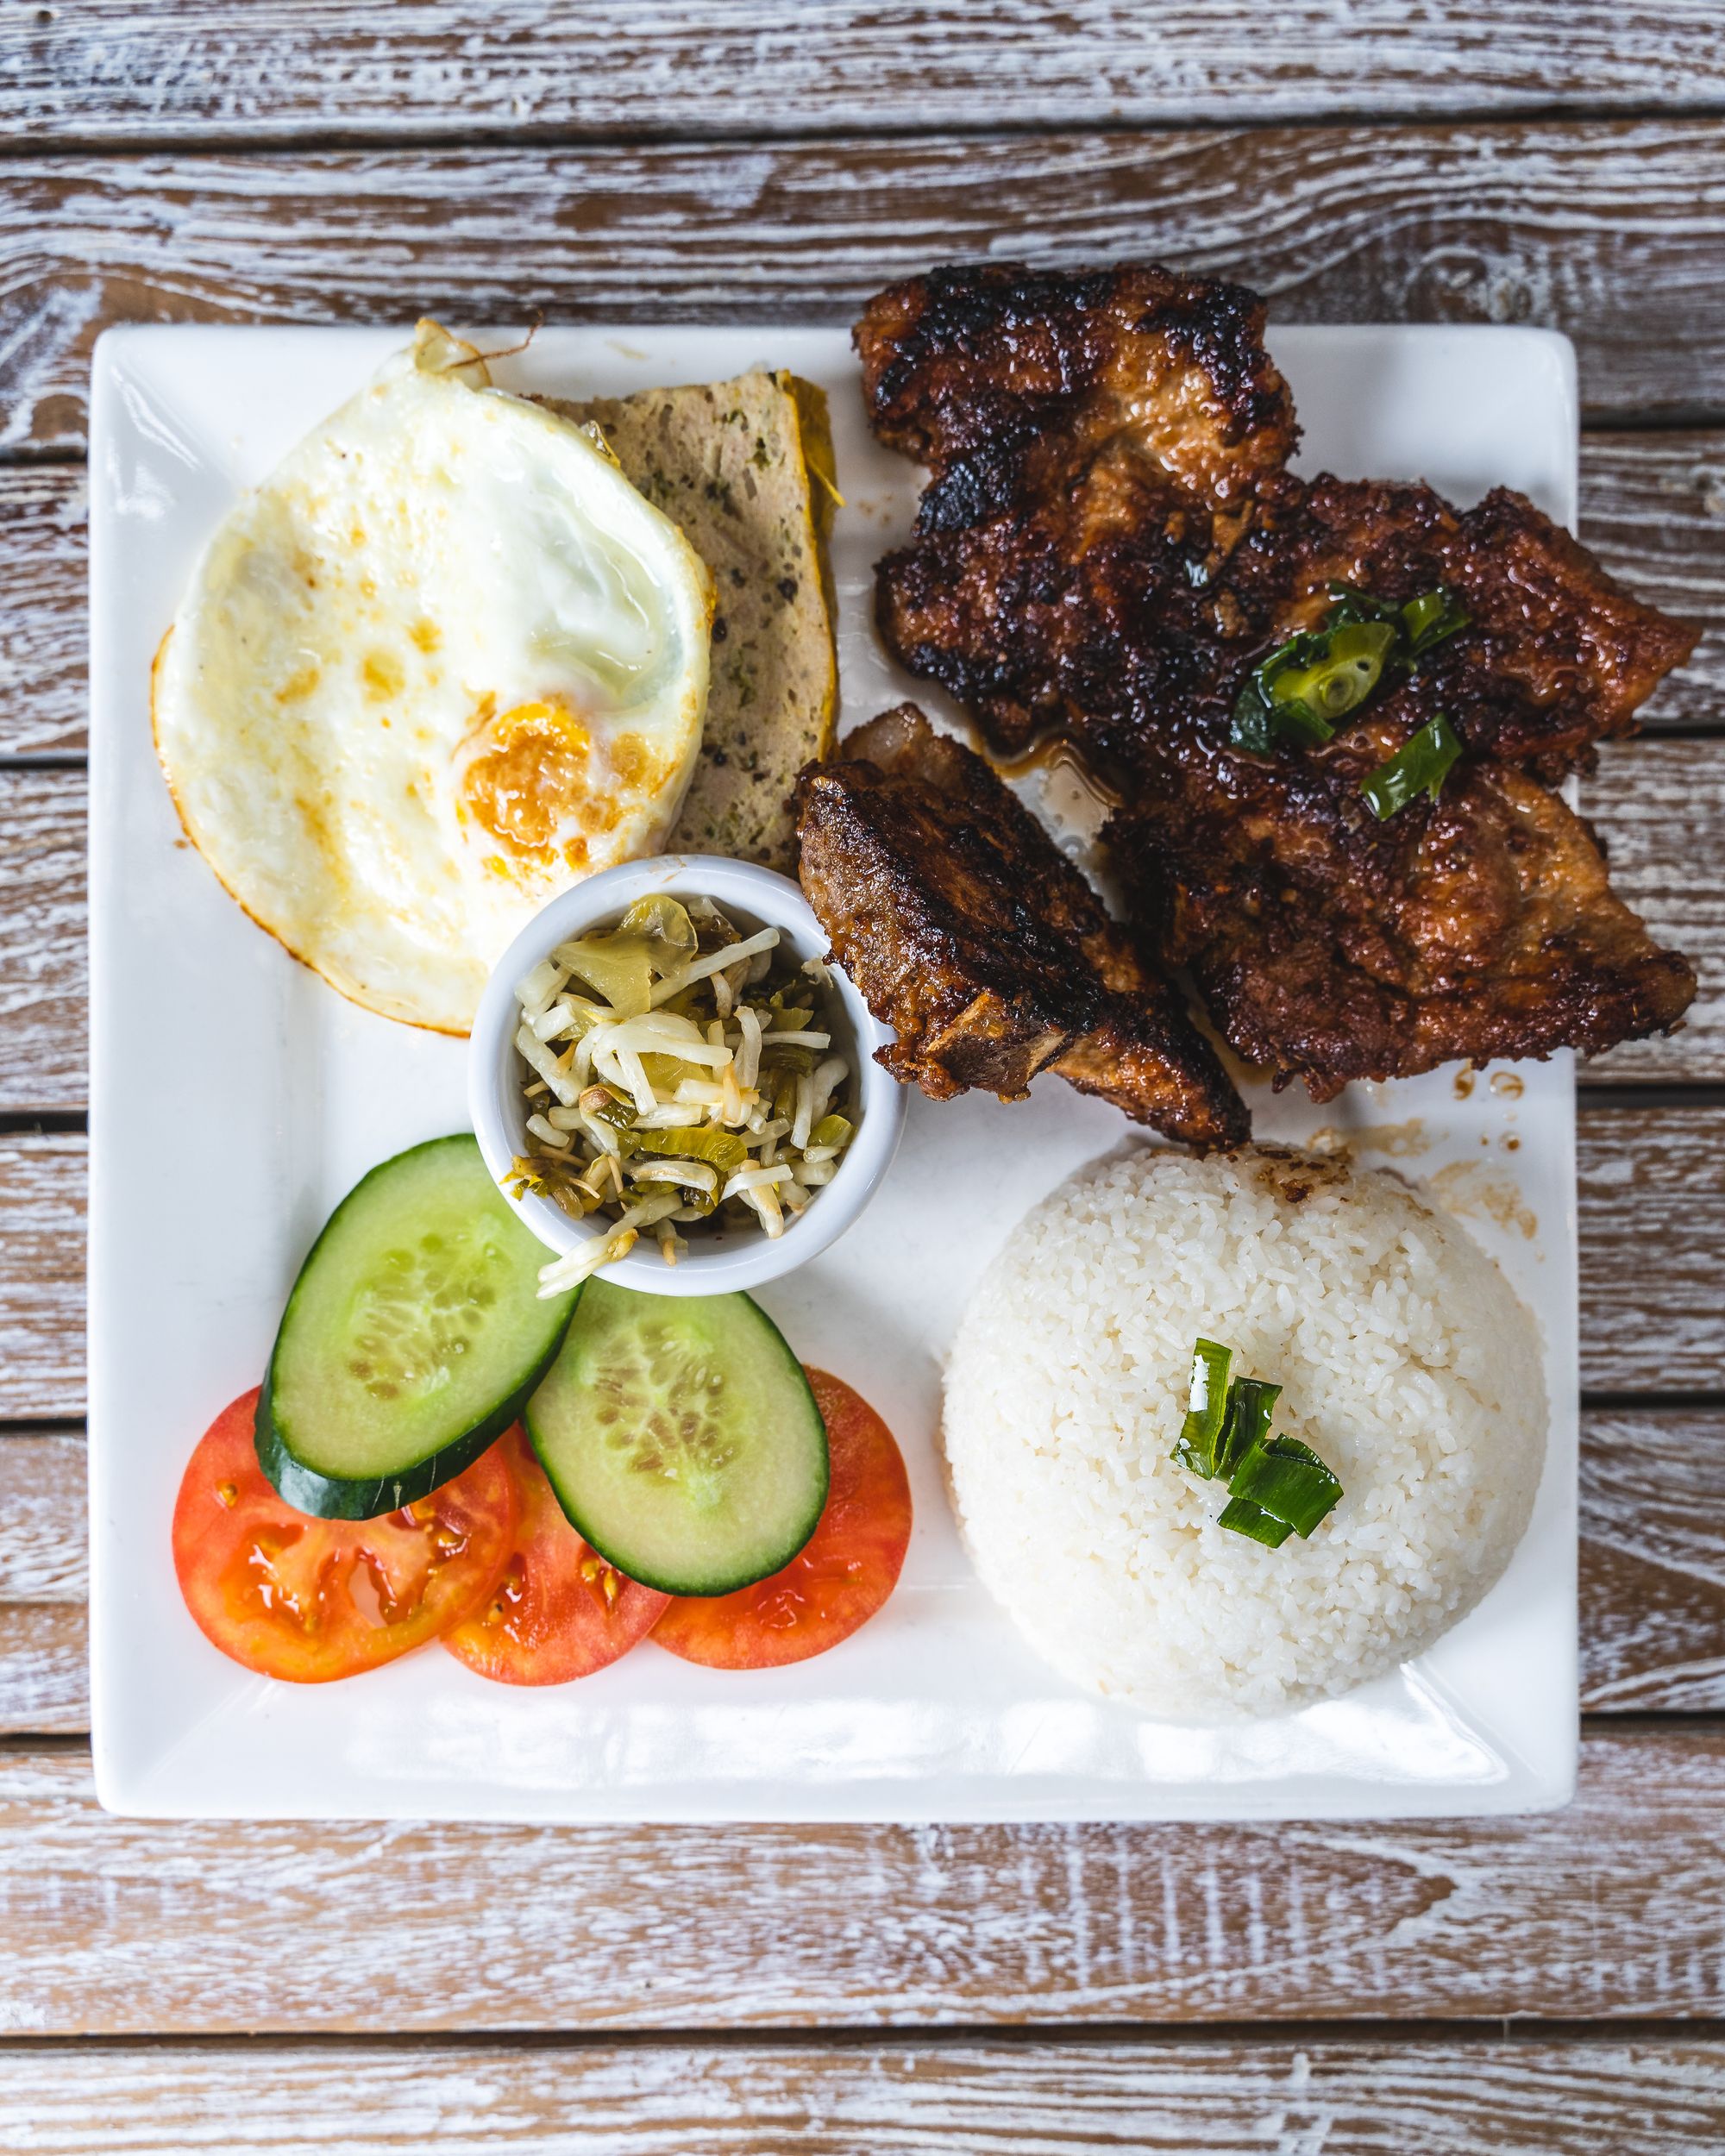 Overhead shot of broken rice with an egg, cucumber, tomato, grilled pork and rice